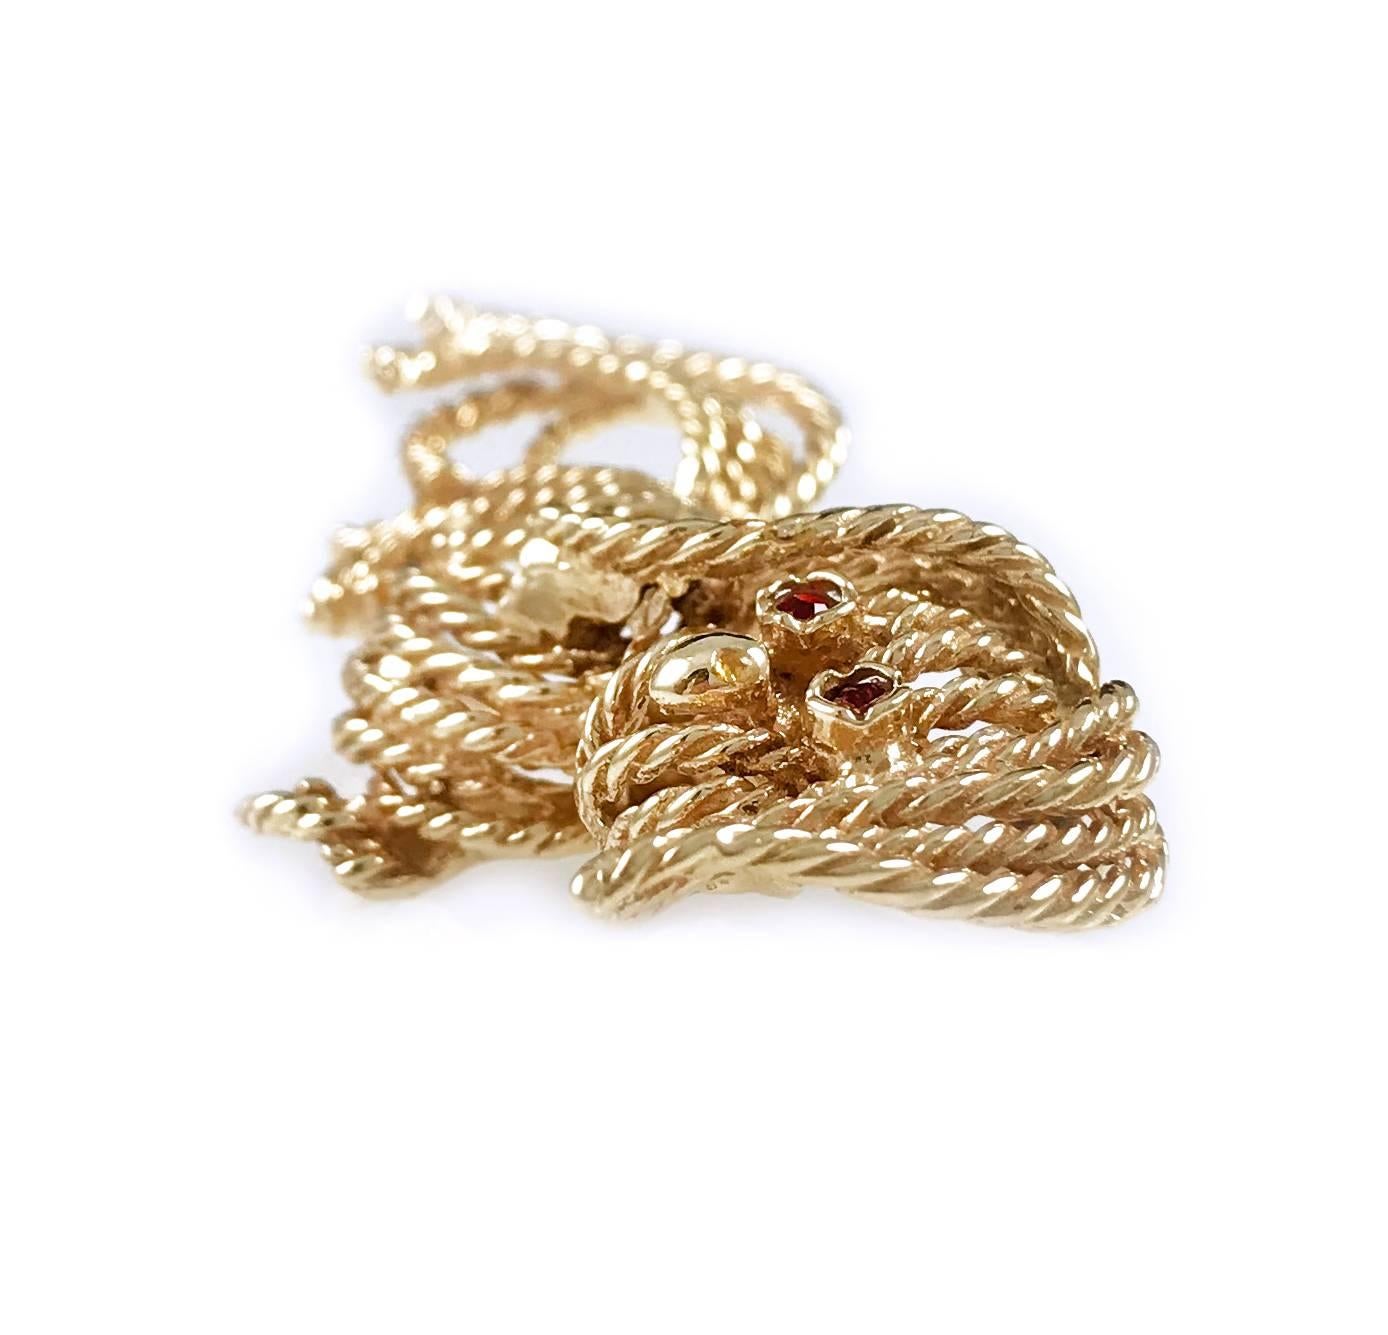 Handmade Vintage 14 Karat Yellow Gold Twisted Wire Dog Brooch. Reminiscent of a Van Cleef & Arpels brooch, this adorable dog brooch has delicate details throughout with a smooth oval nose and round ruby eyes.